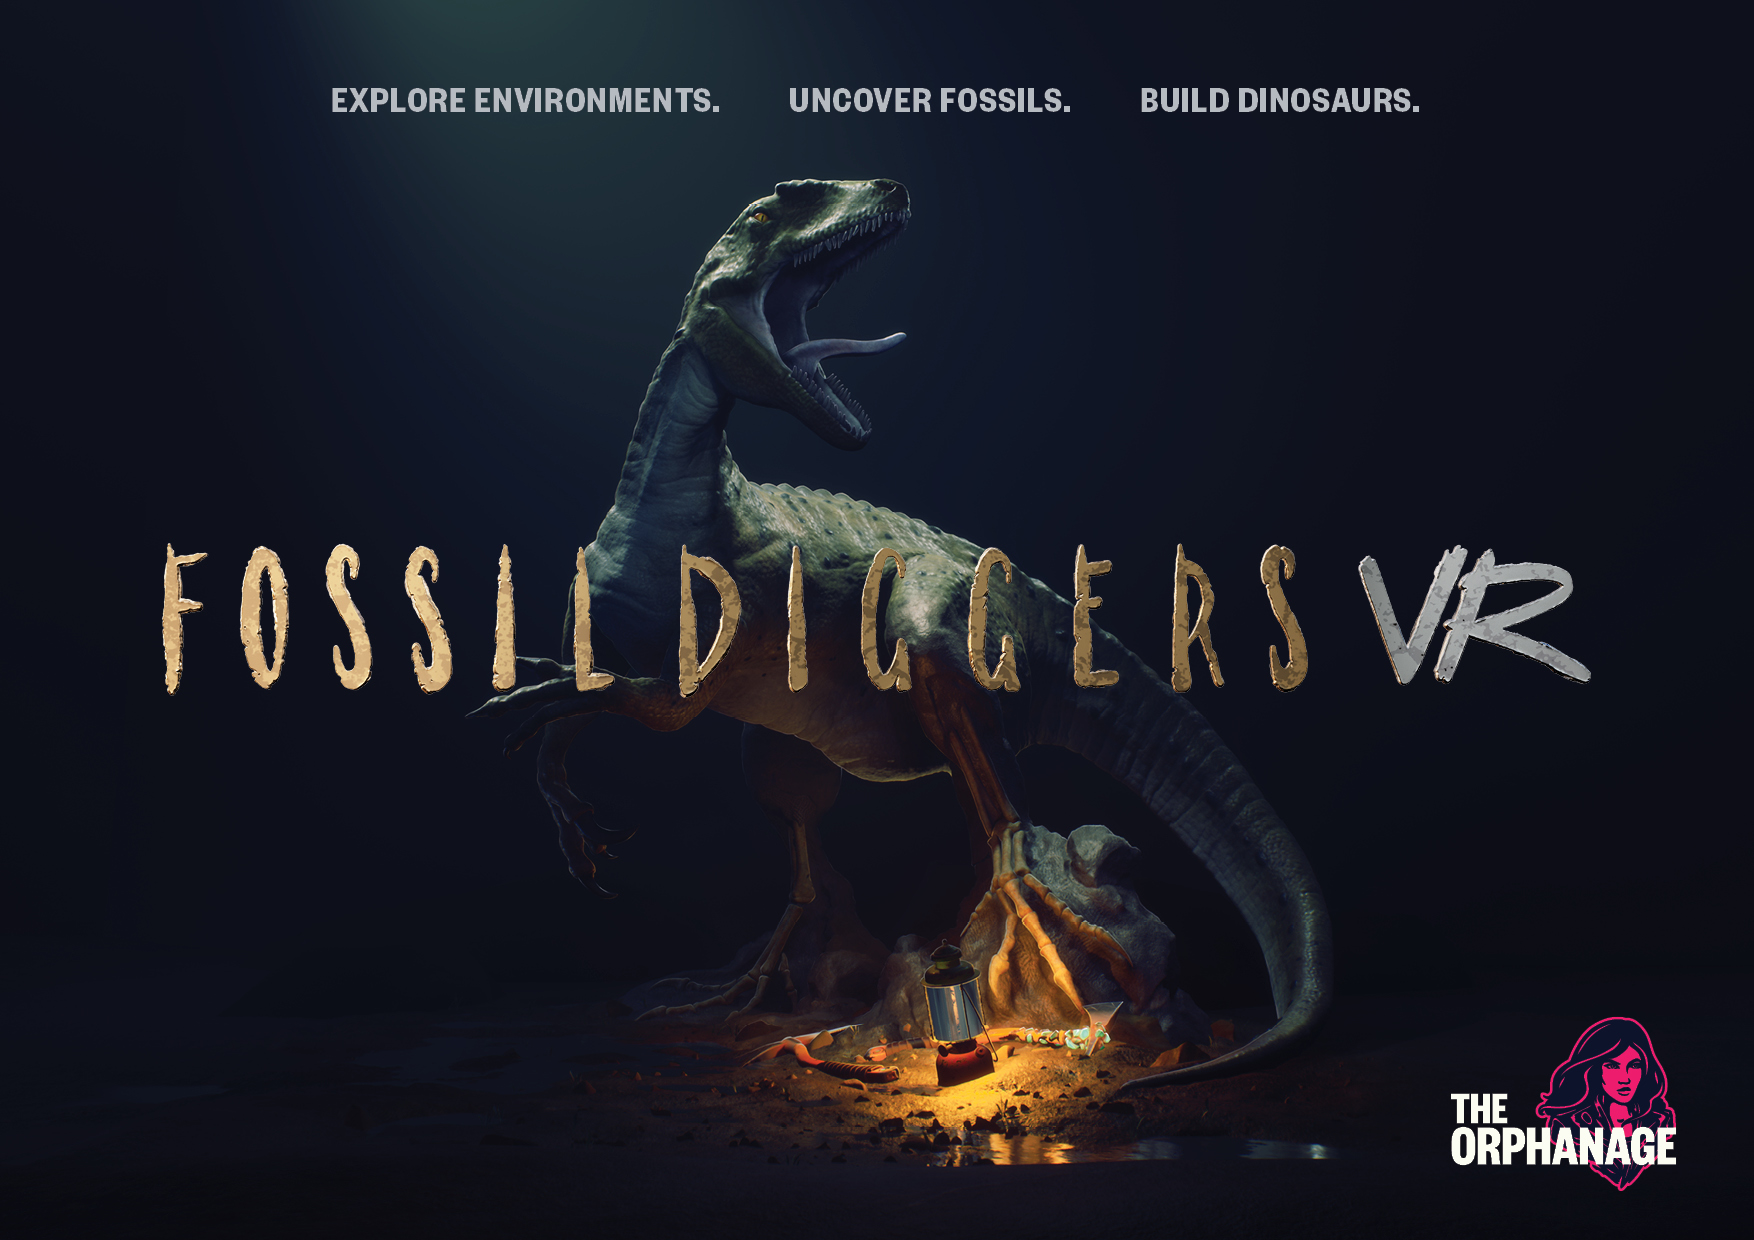 Fossil Diggers VR